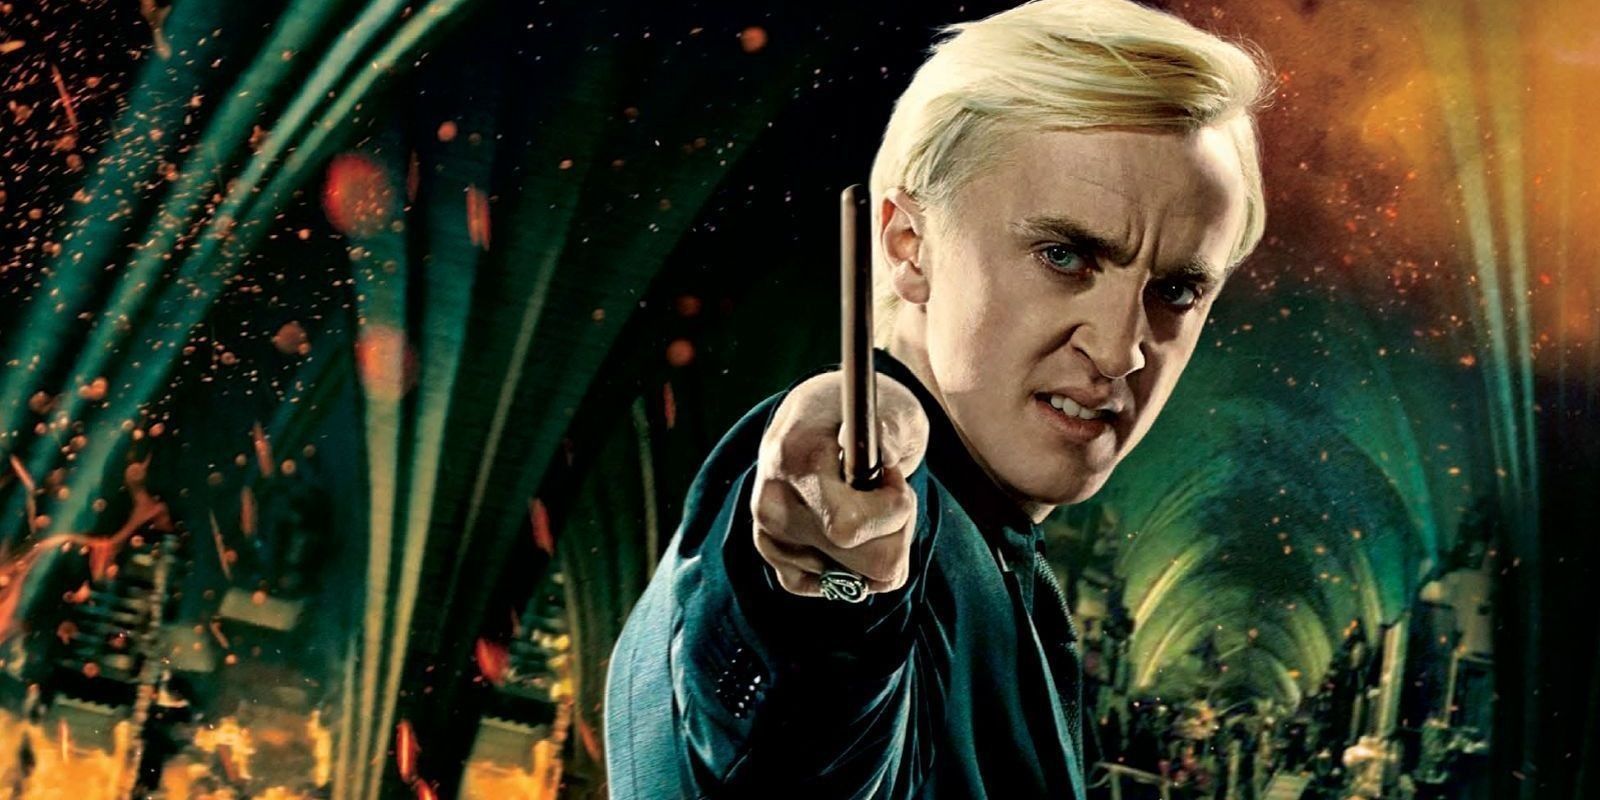 Tom Felton as Draco Malfoy in a promo image for Harry Potter Deathly Hallows Part 2